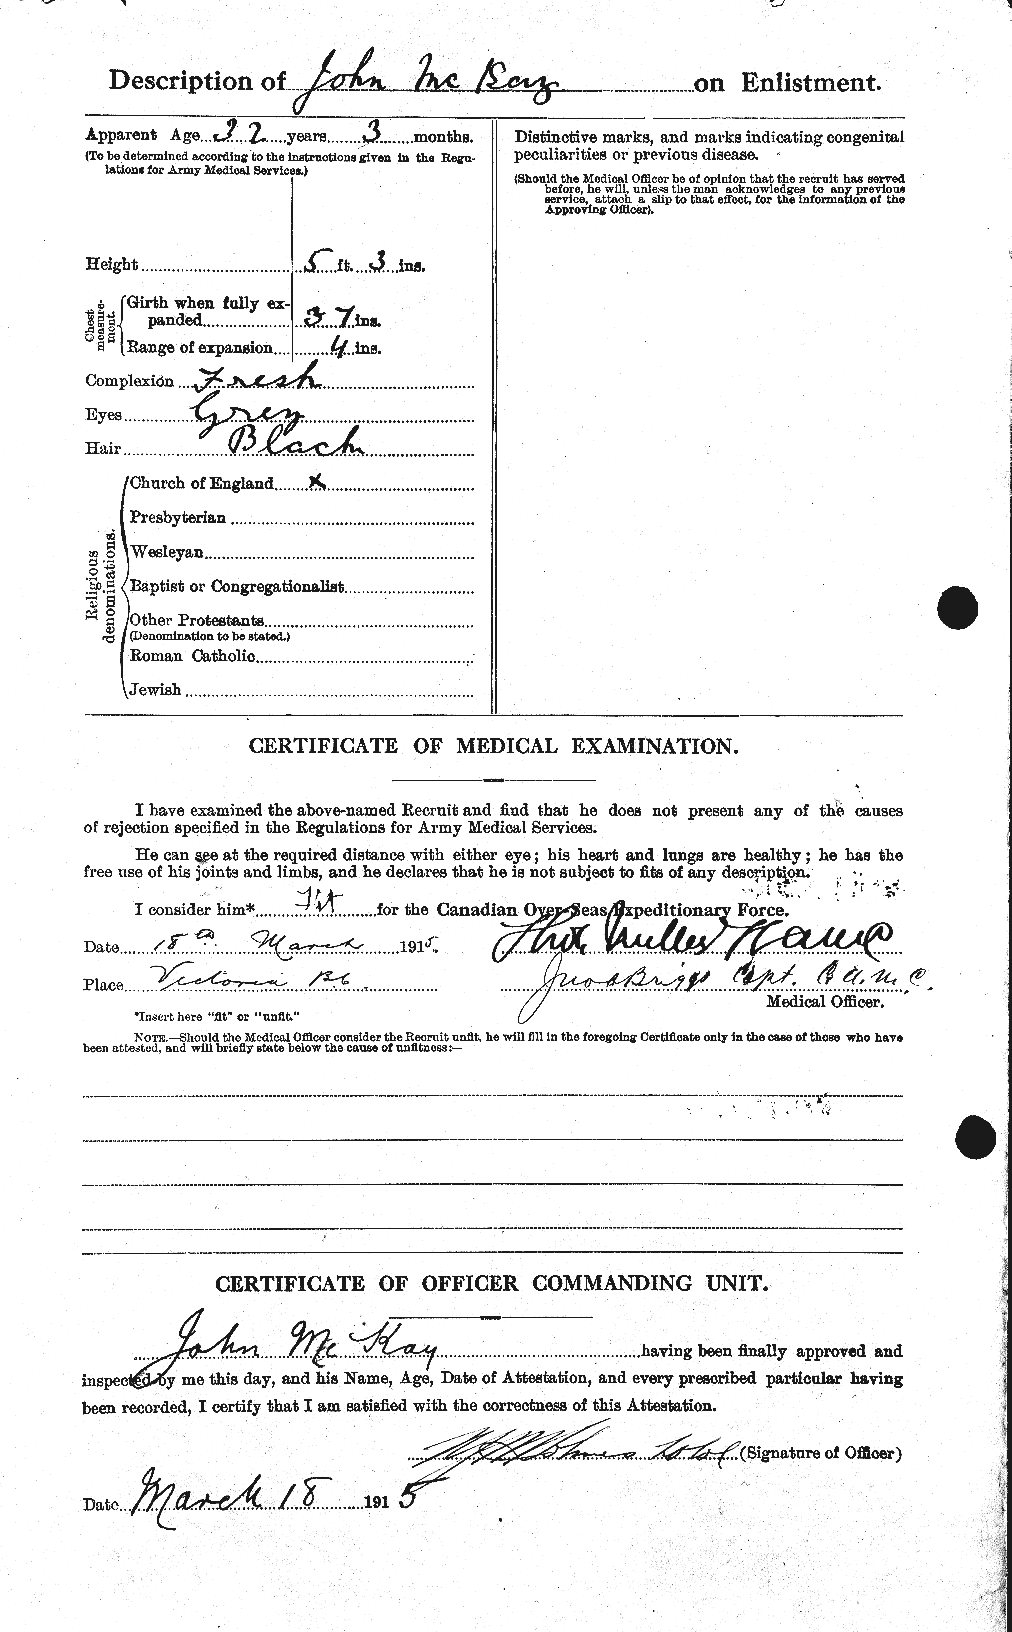 Personnel Records of the First World War - CEF 527006b